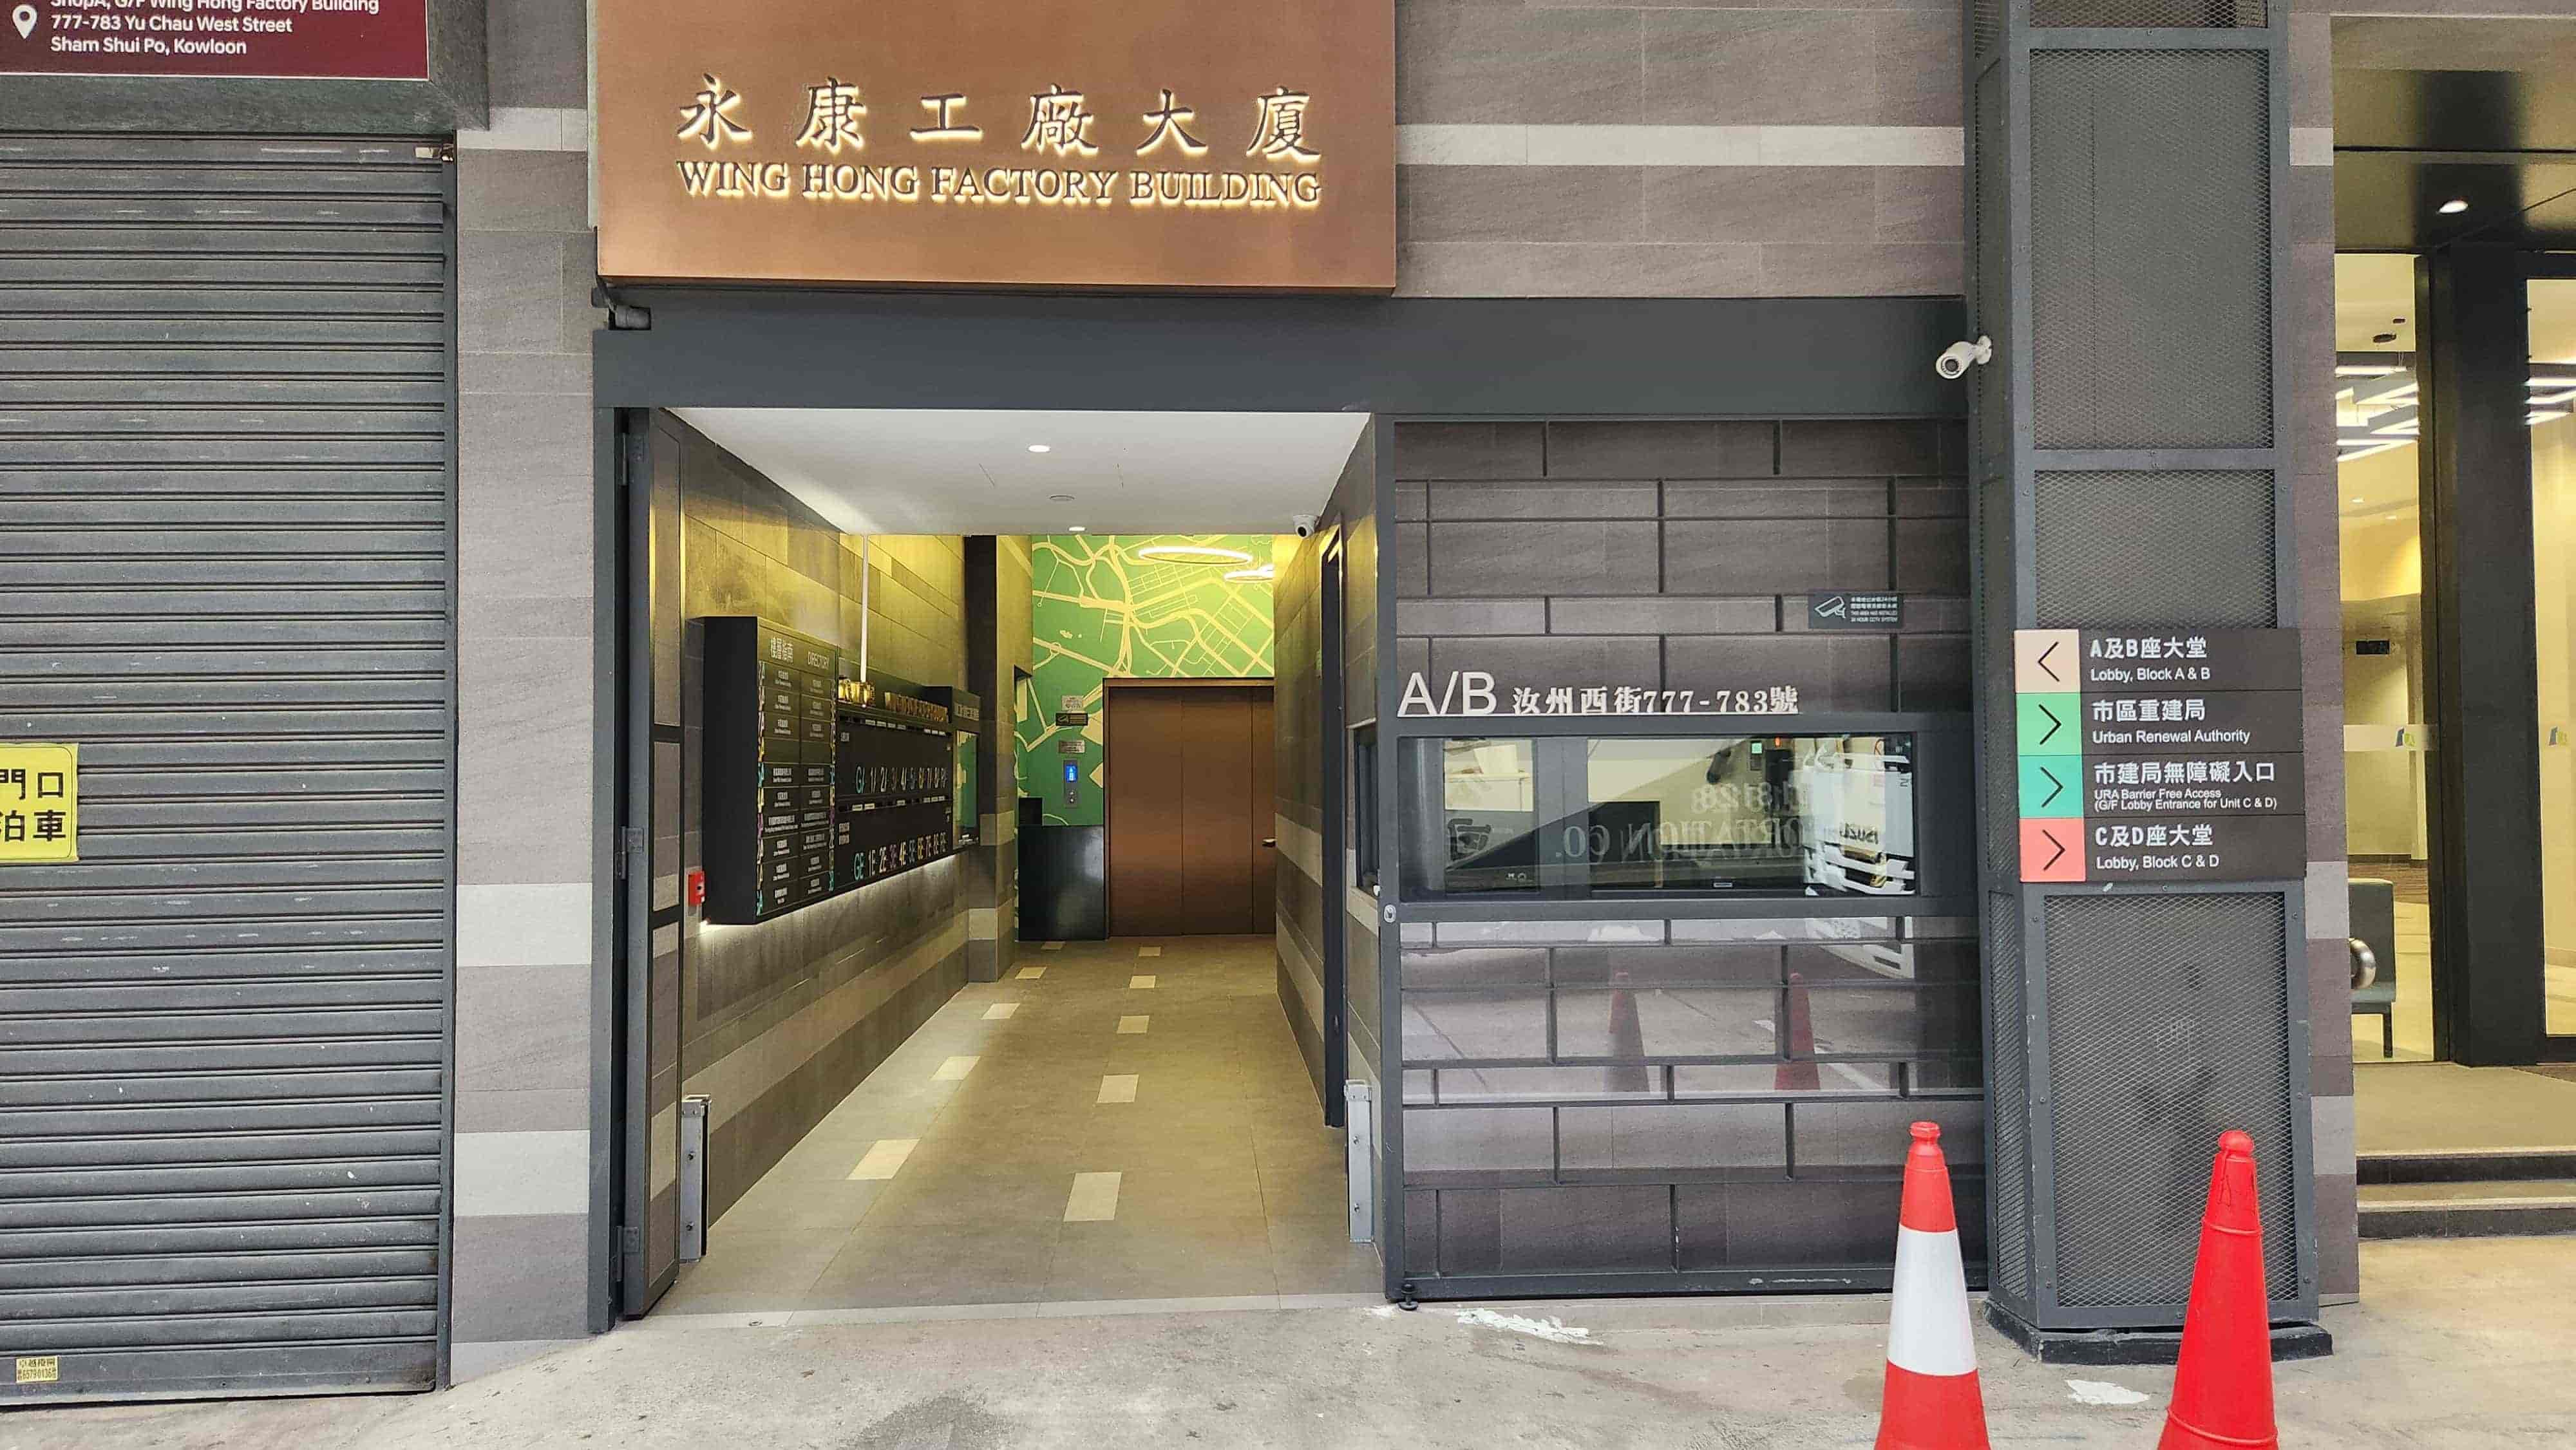 Our office in Wing Hong Building